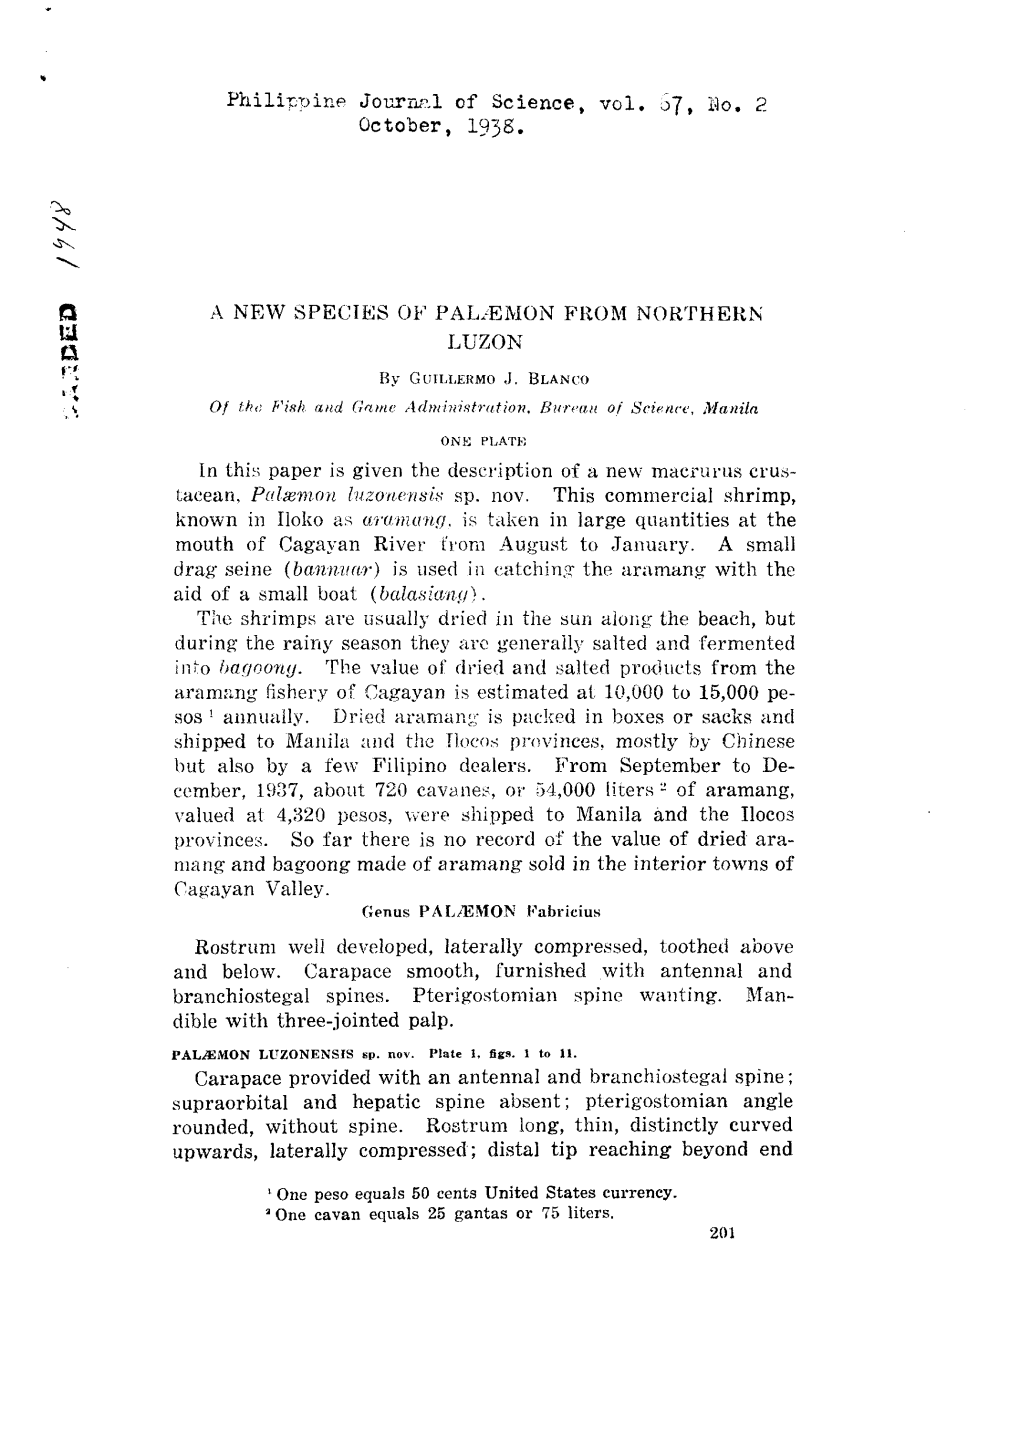 Philippine Journal of Science, Vol. 67, Ho, 2 October, 193S